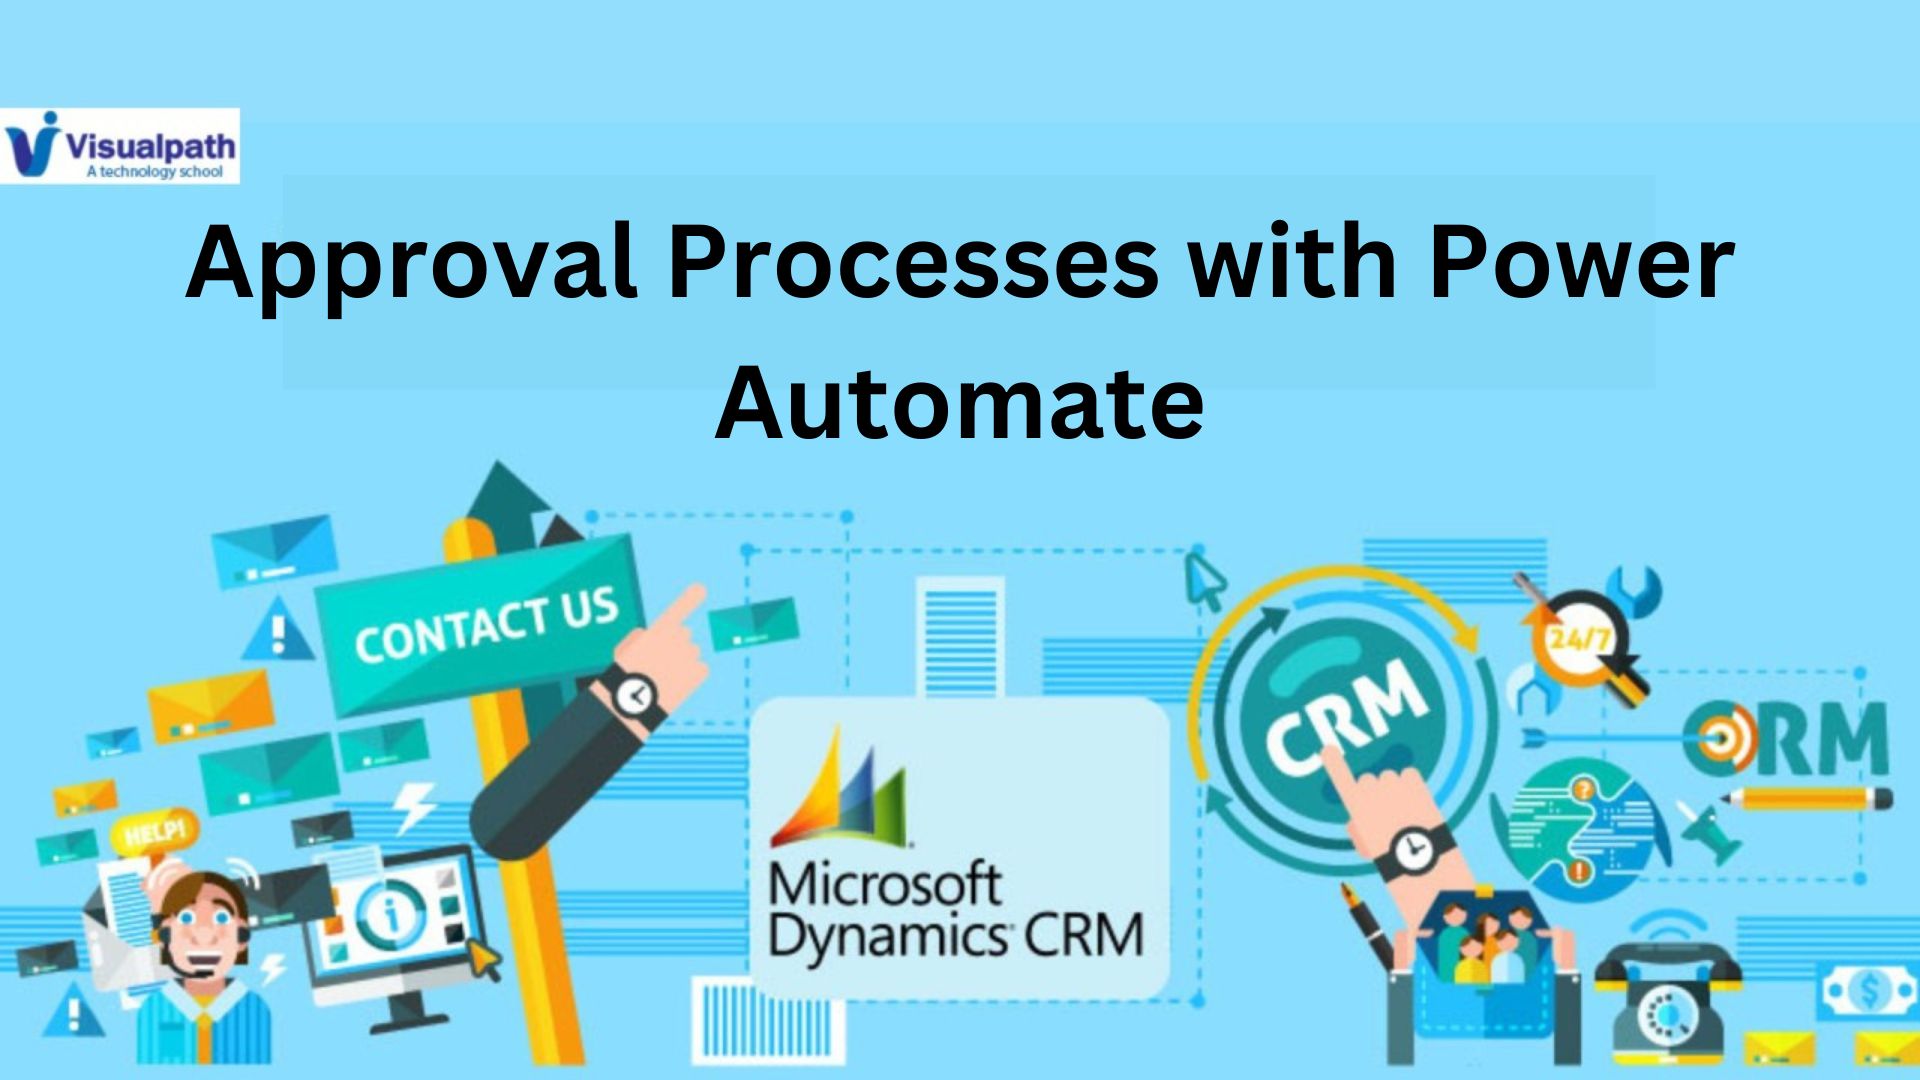 Dynamics 365 CRM: Approval Processes with Power Automate